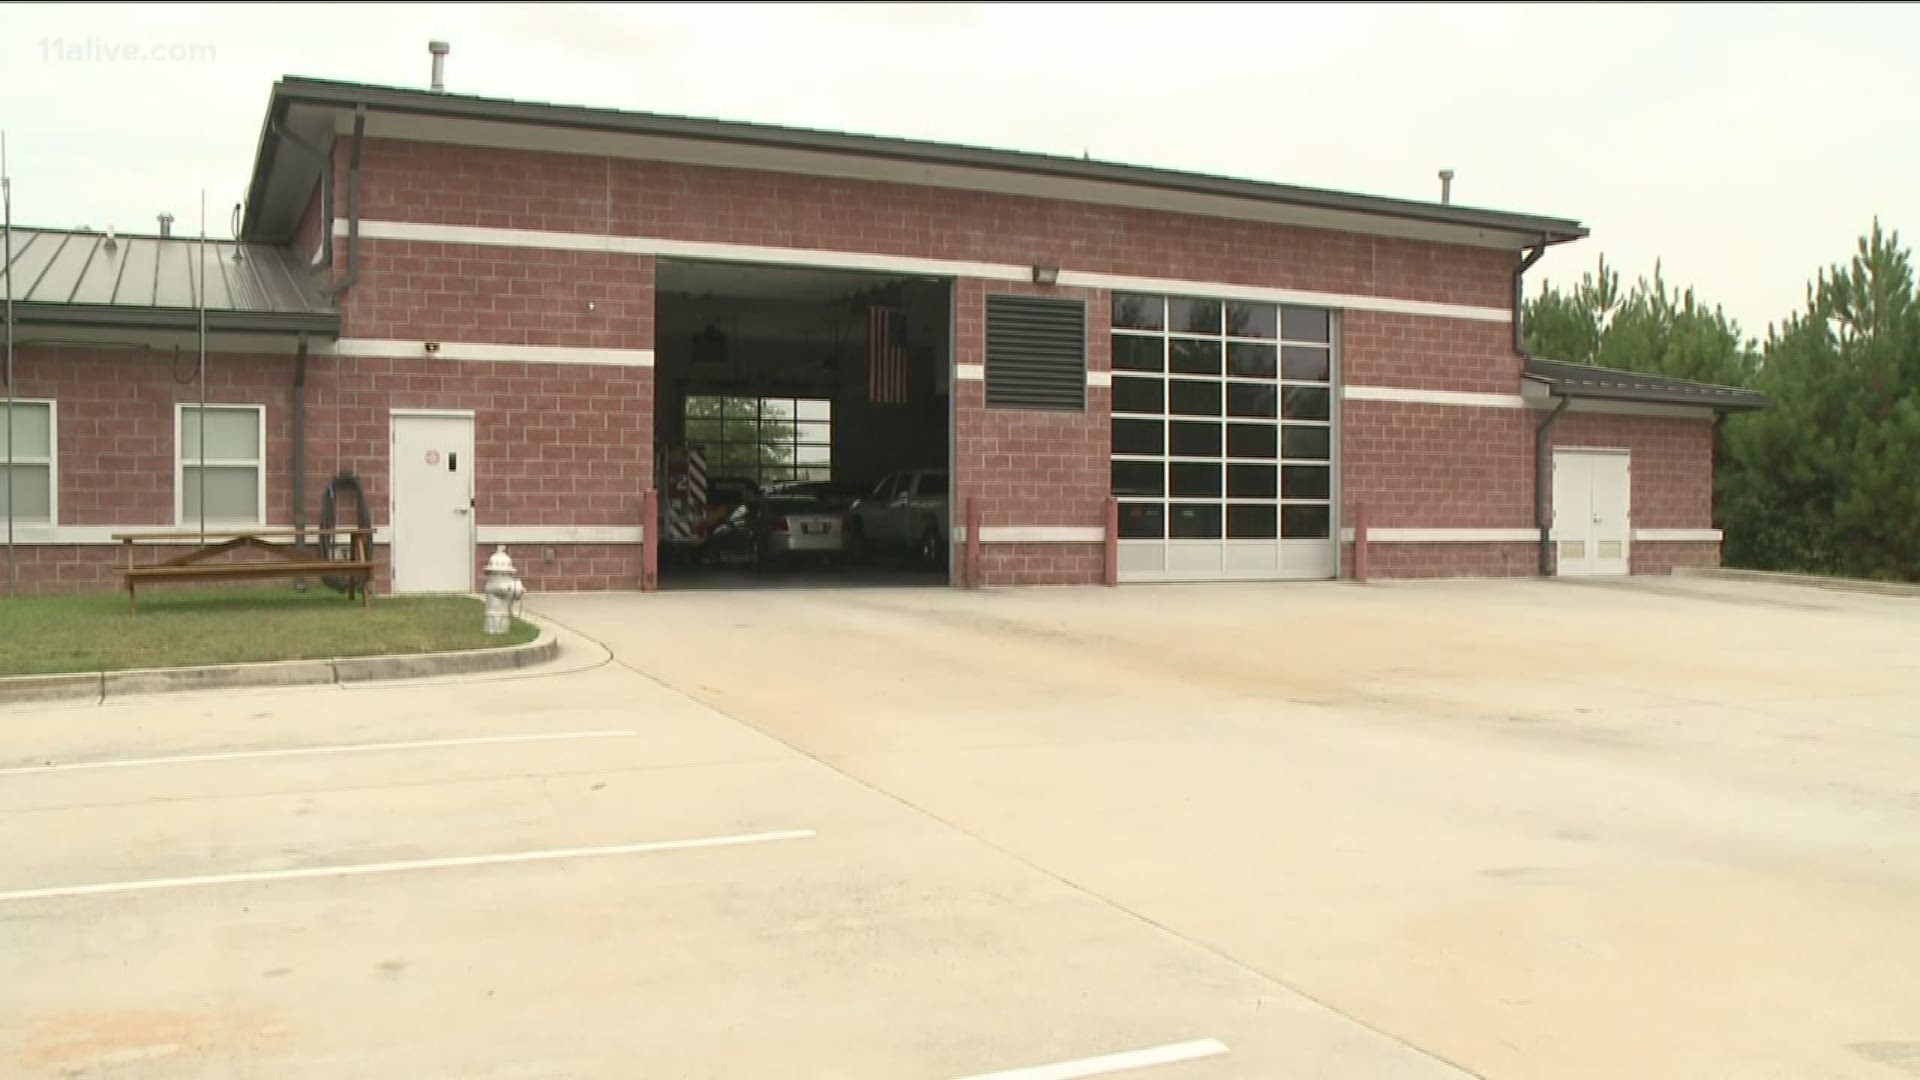 Some of their vehicles have been broken into at the fire station.